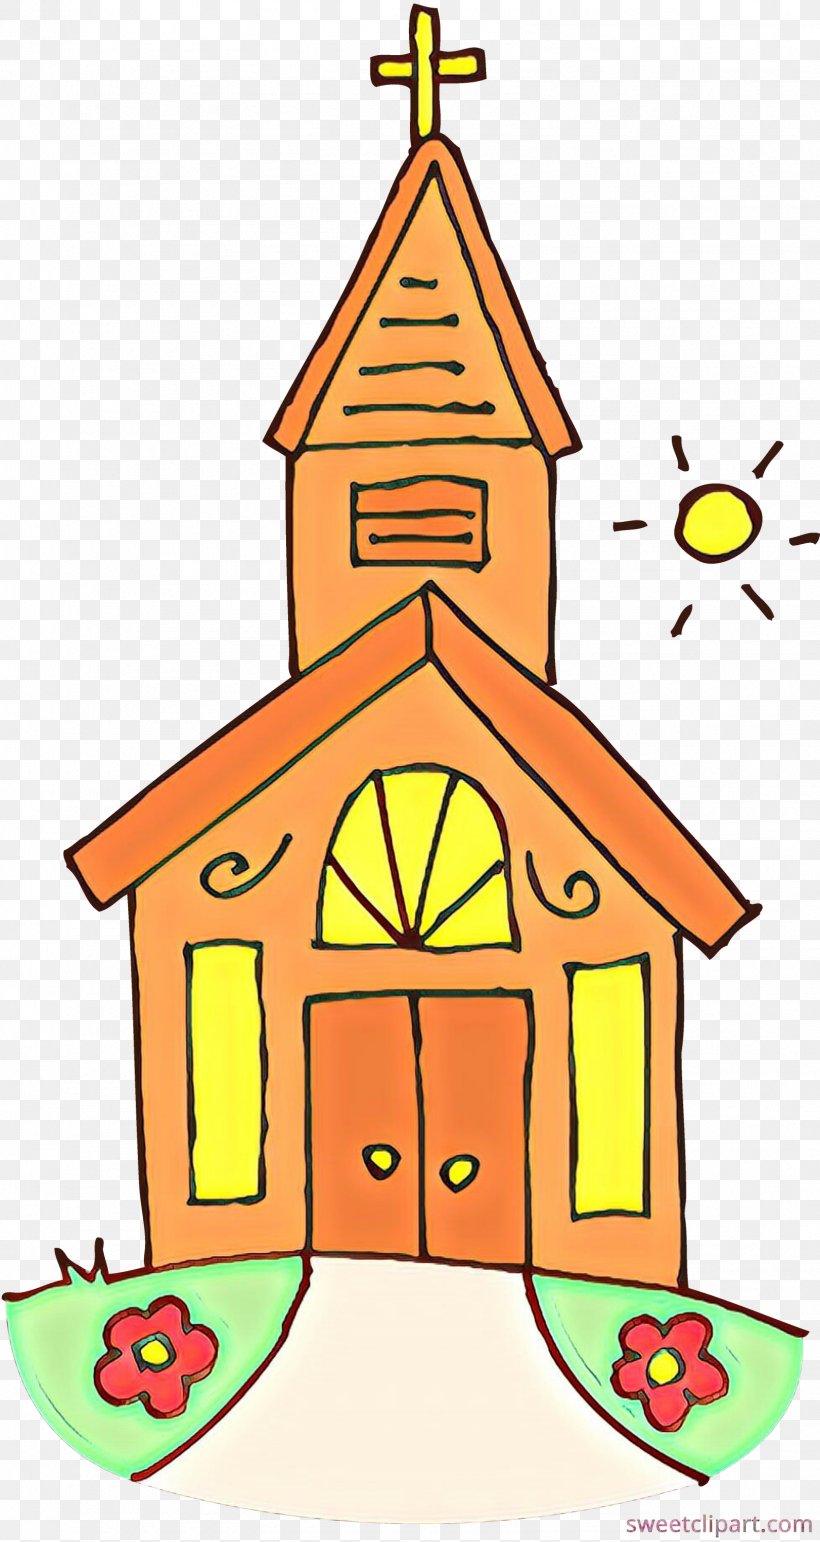 Clip Art Steeple Building House Place Of Worship, PNG, 1594x2999px, Cartoon, Building, House, Place Of Worship, Steeple Download Free